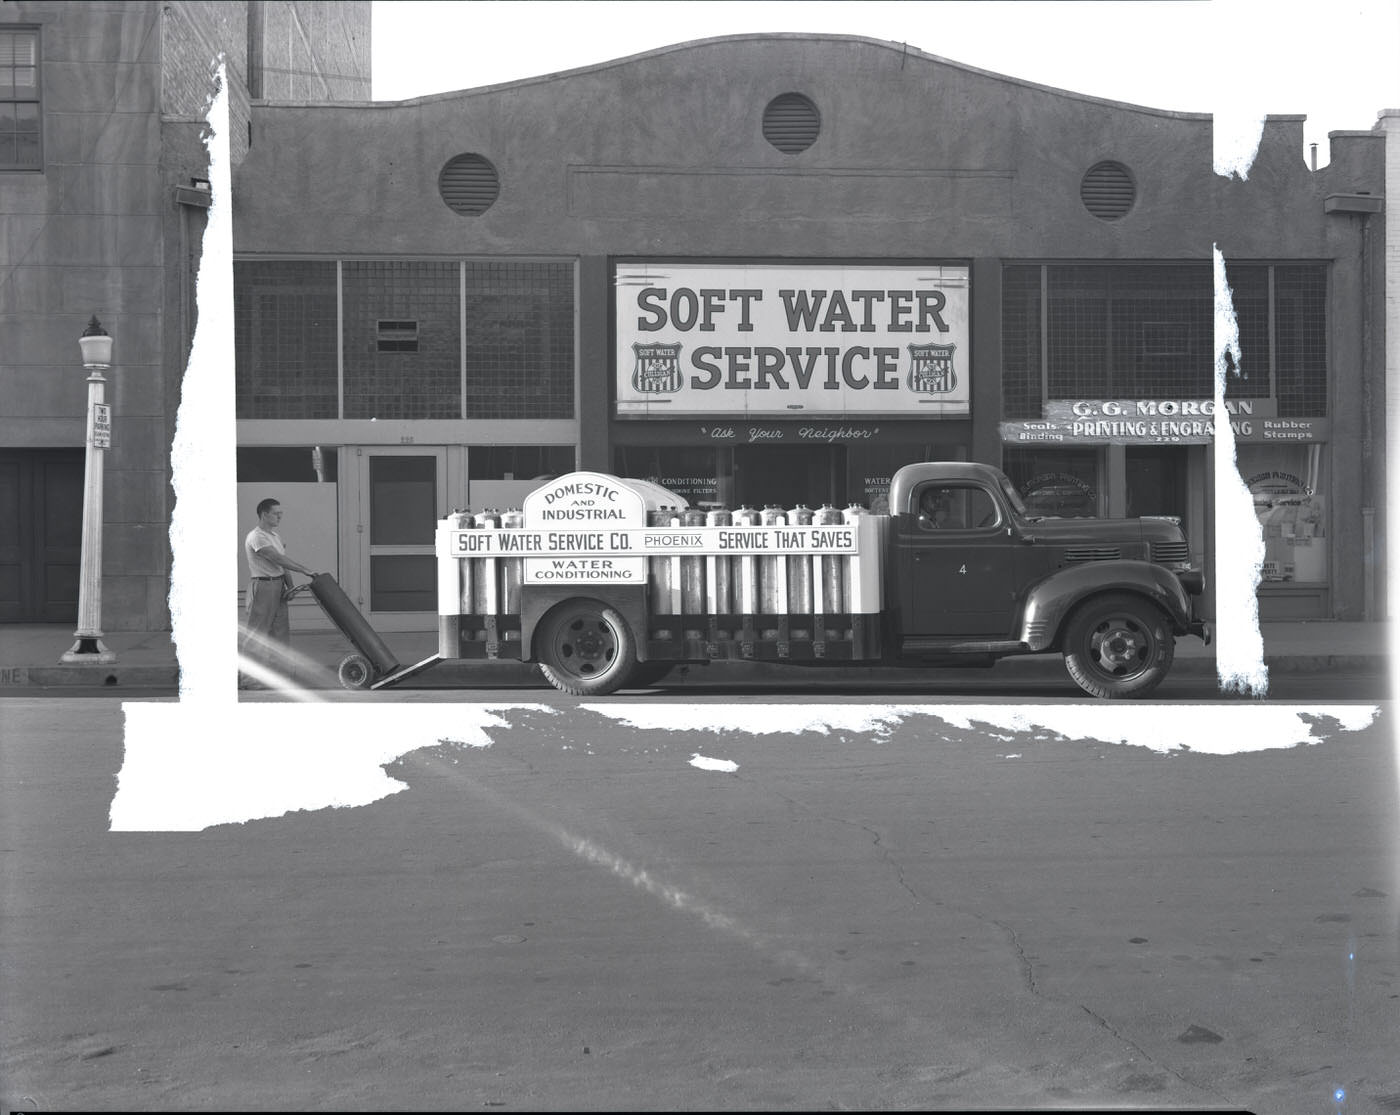 Soft Water Service Co. Building Exterior and Truck, 1944